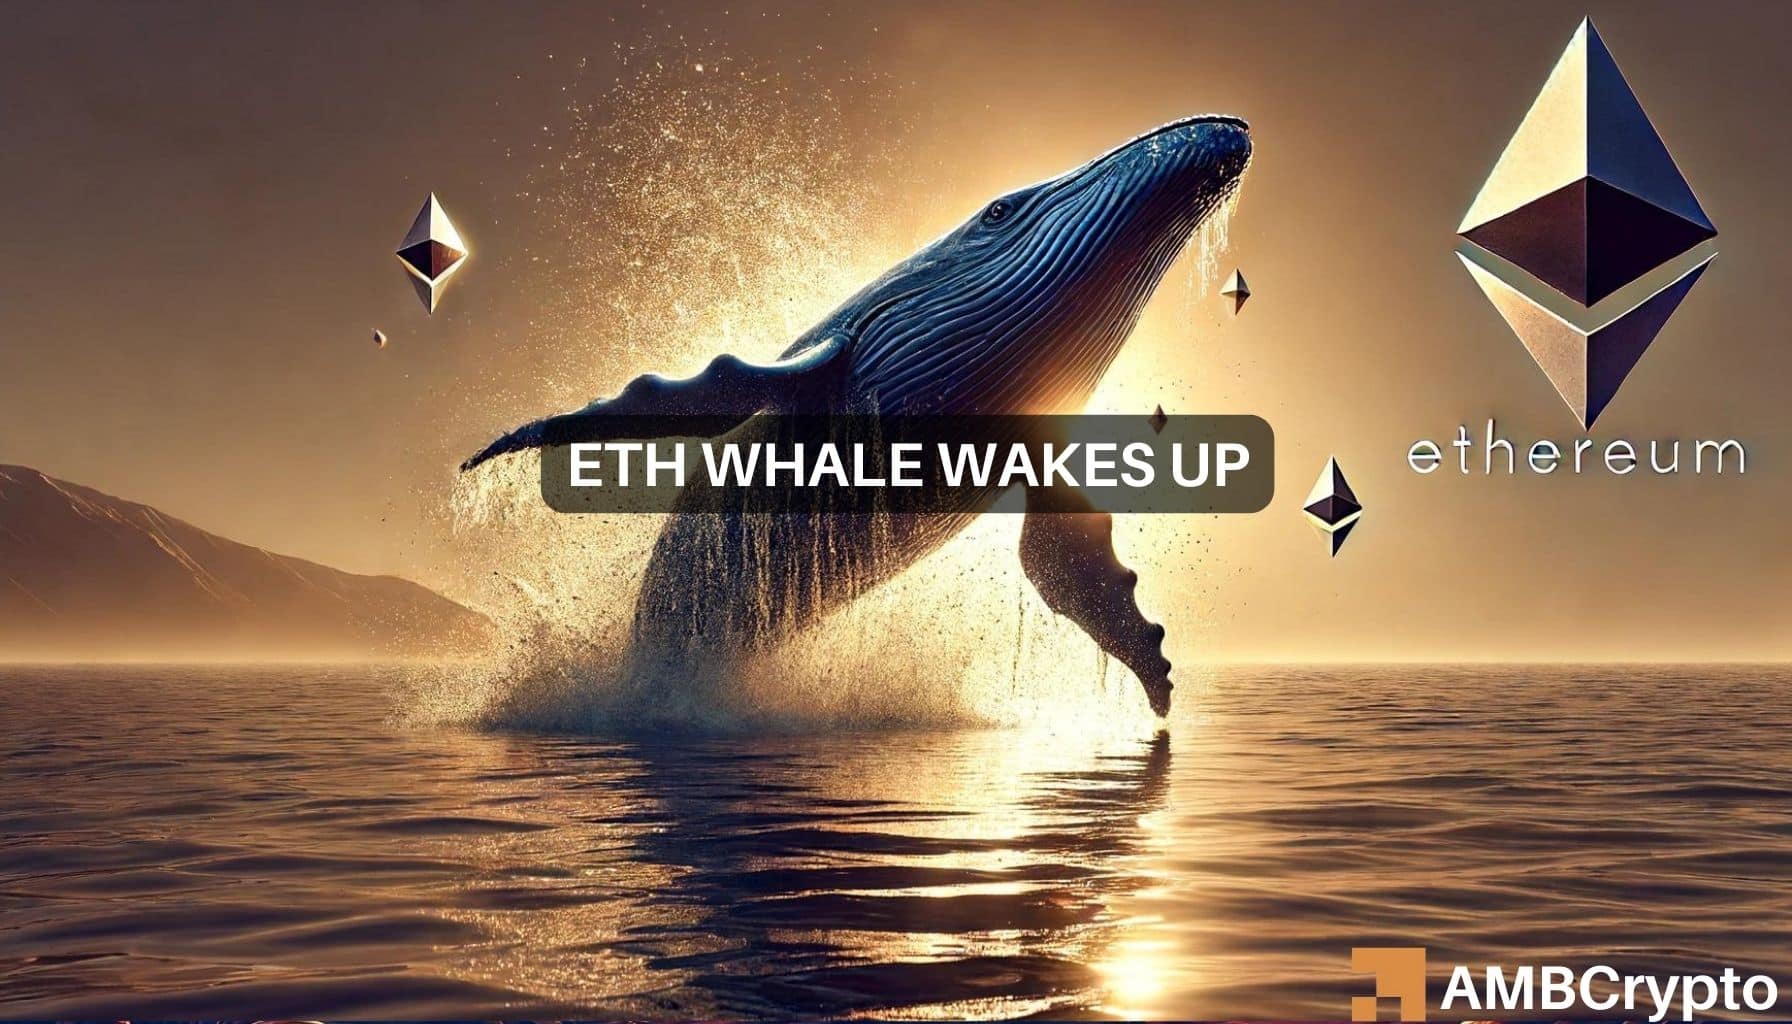 Ethereum dips as ICO whale unloads: What’s next for ETH traders?